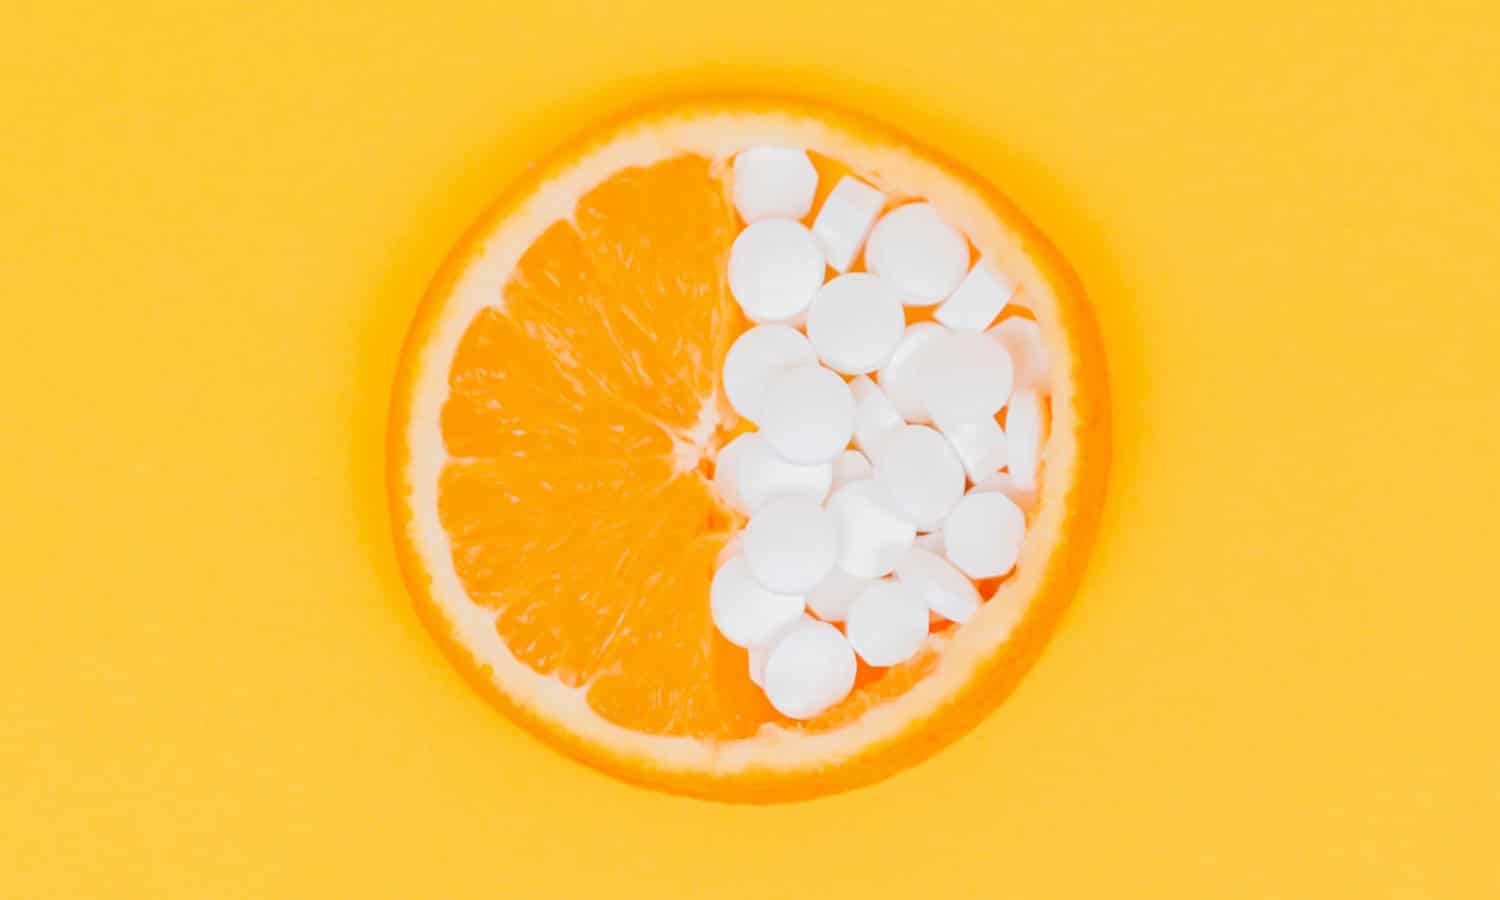 An orange slice with white pills covering half of the slice, against a yellow-orange backdrop